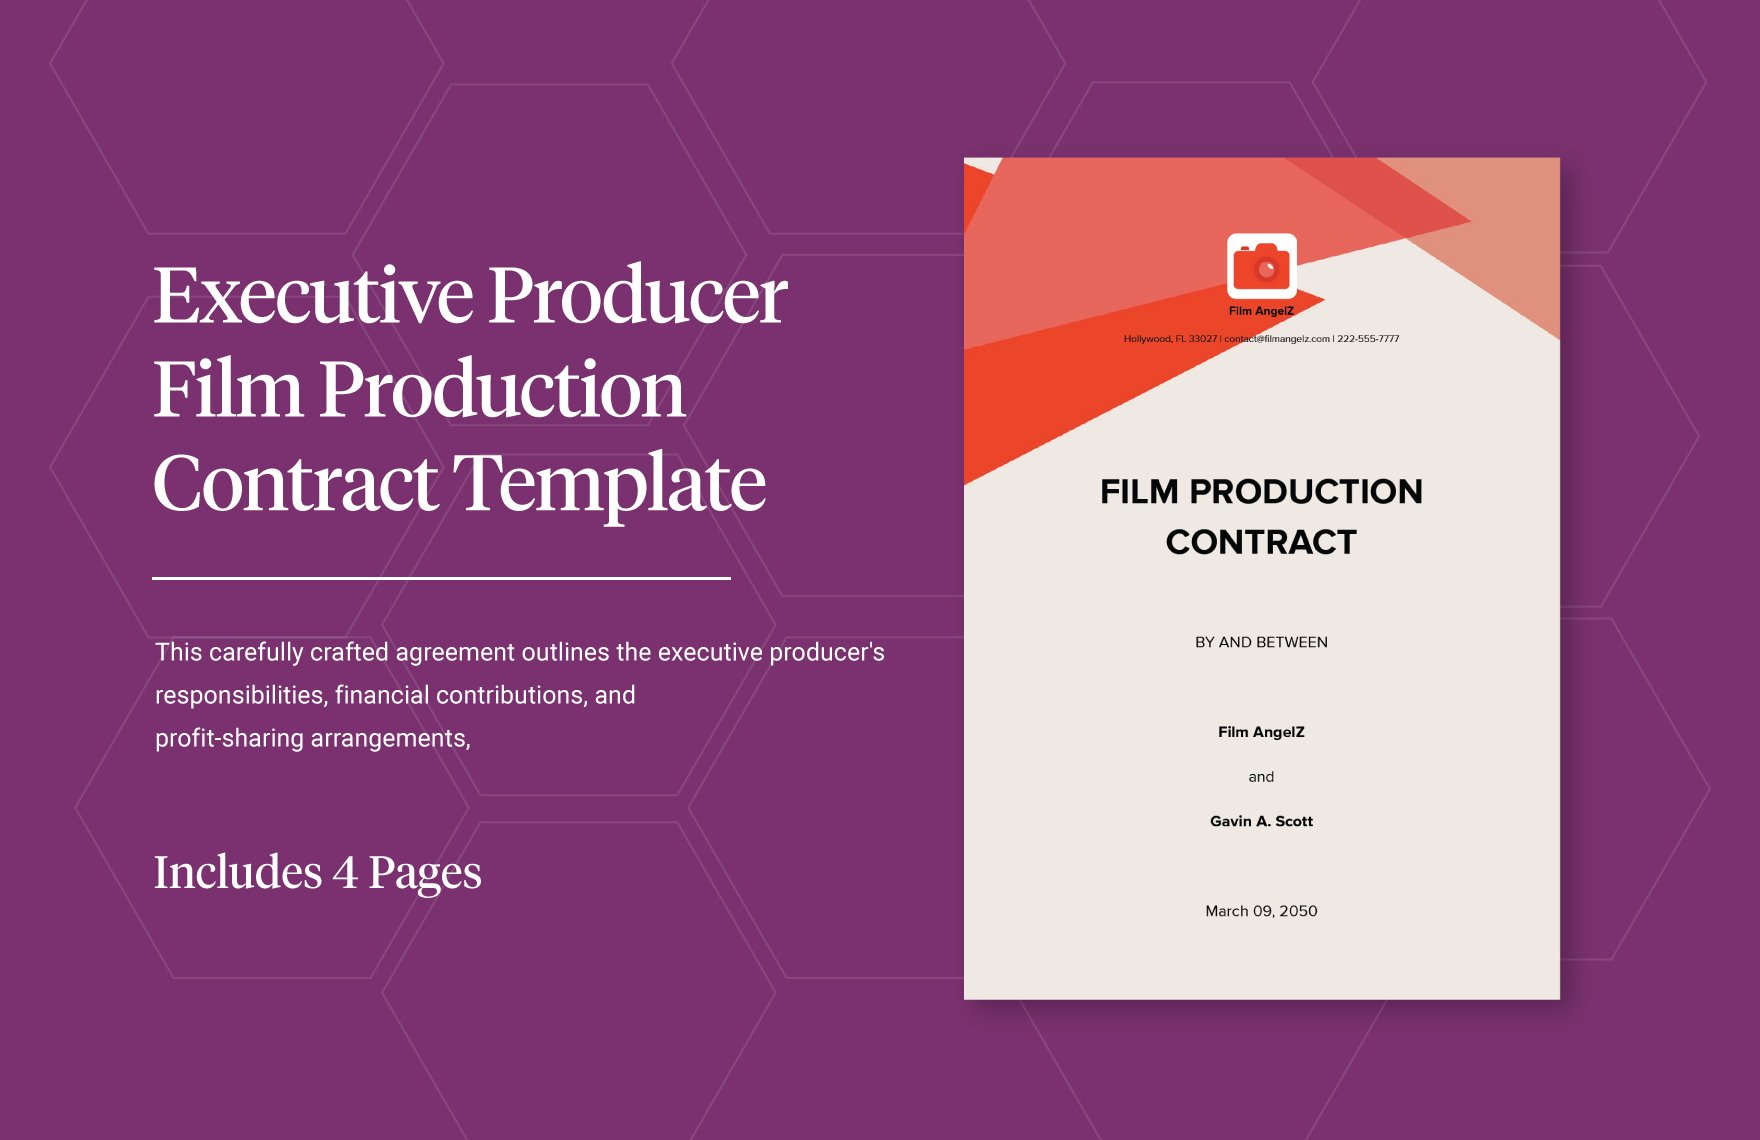 Executive Producer Film Production Contract Template